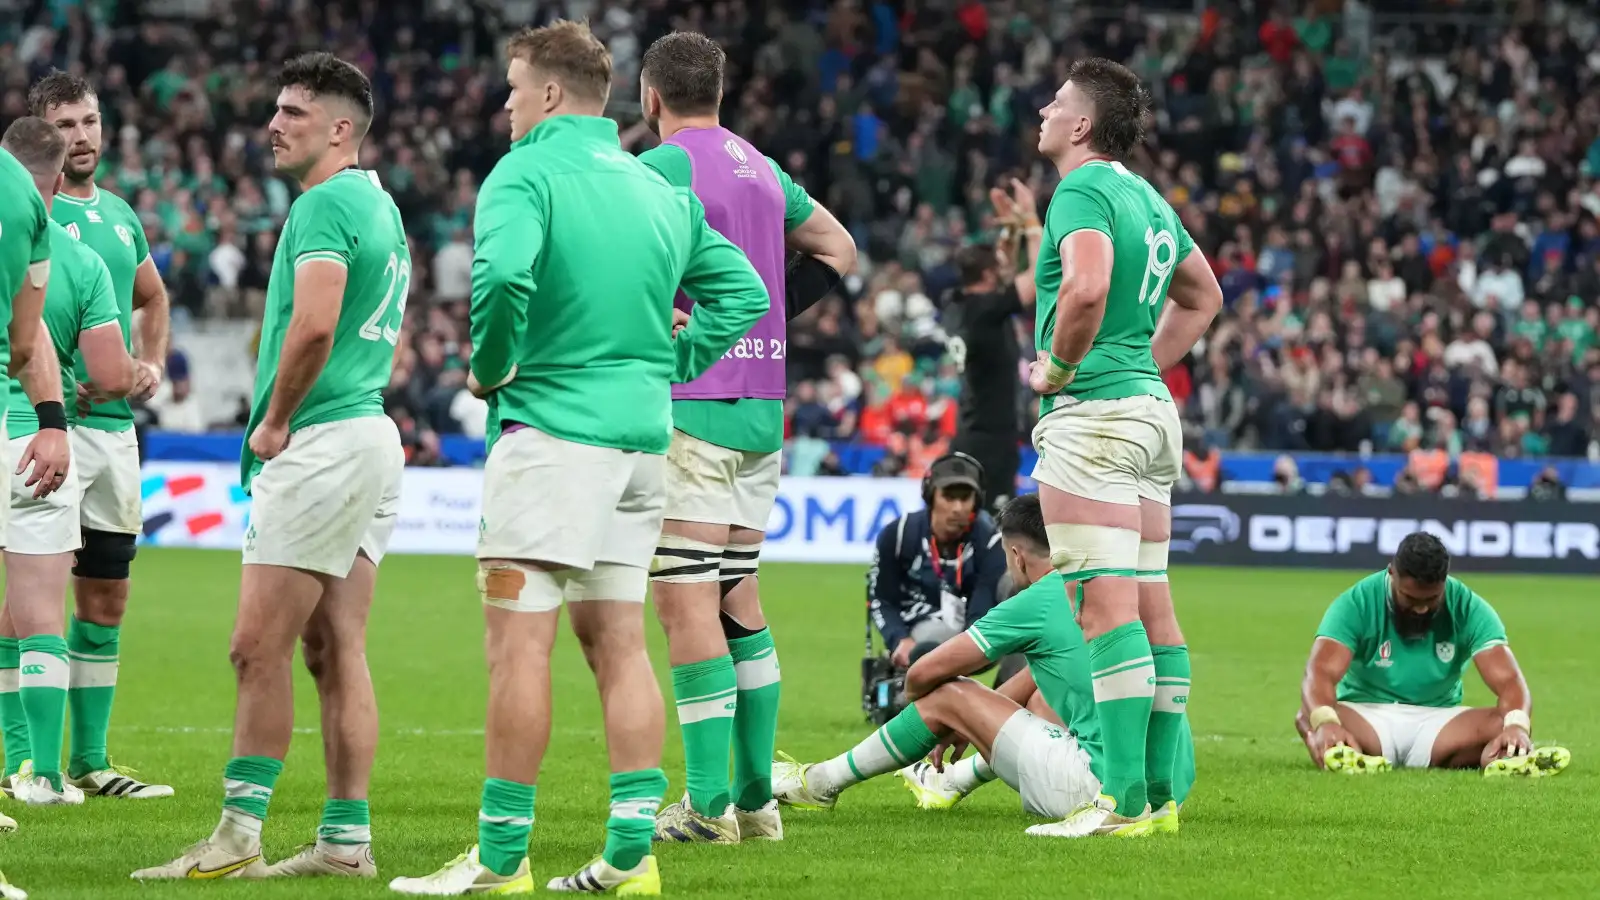 Ireland dejected after losing to All Blacks in the Rugby World Cup.